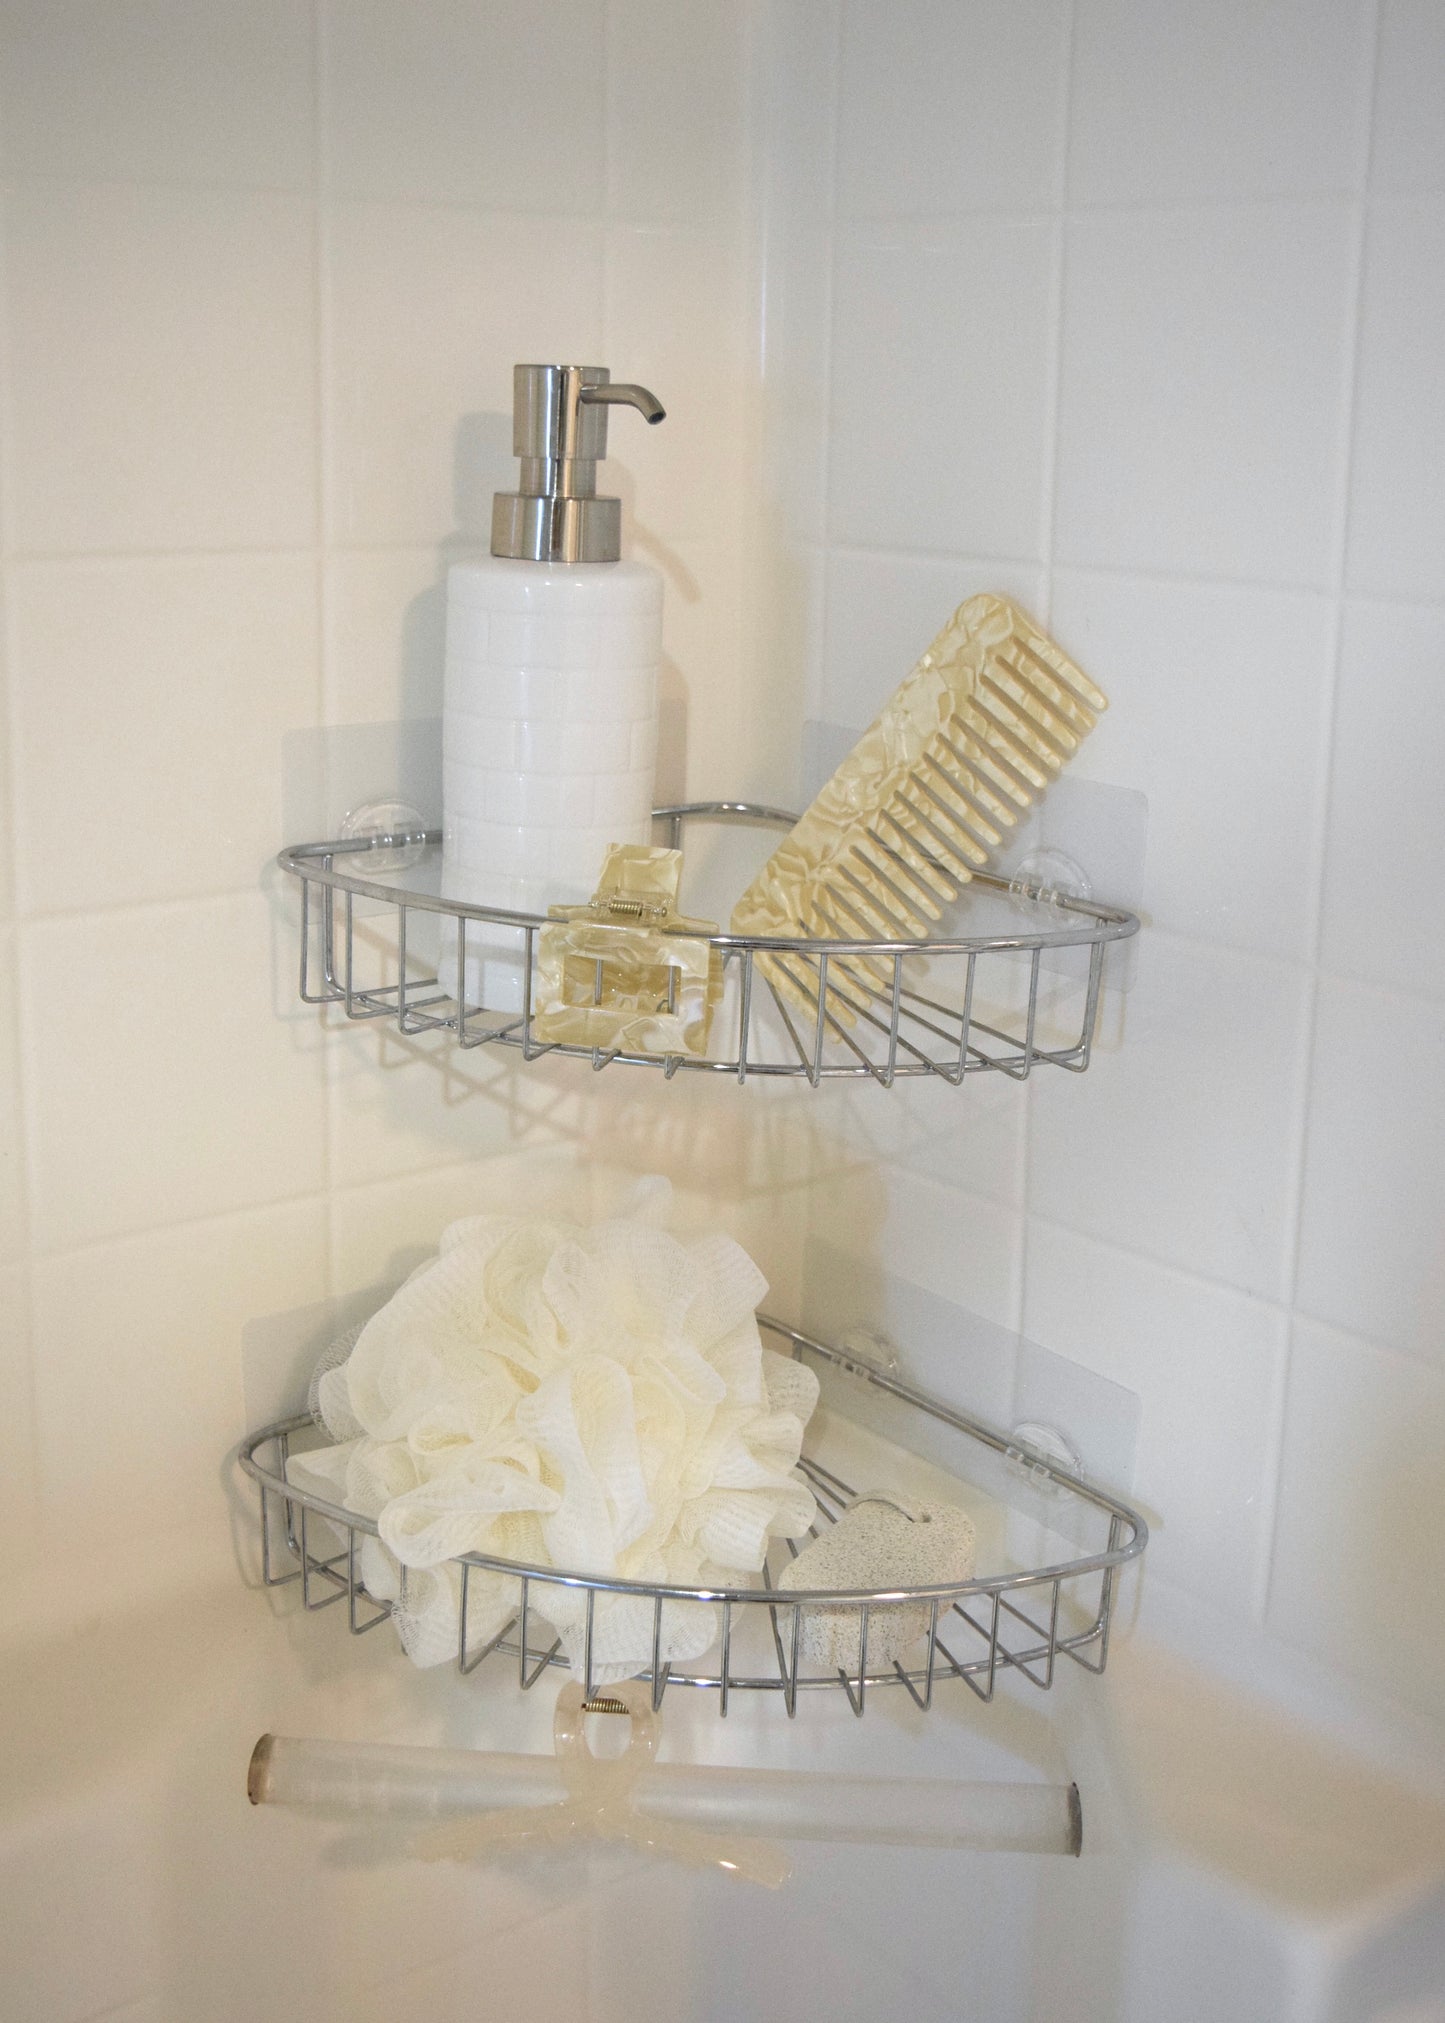 Marble wide tooth detangling comb placed on shower shelf